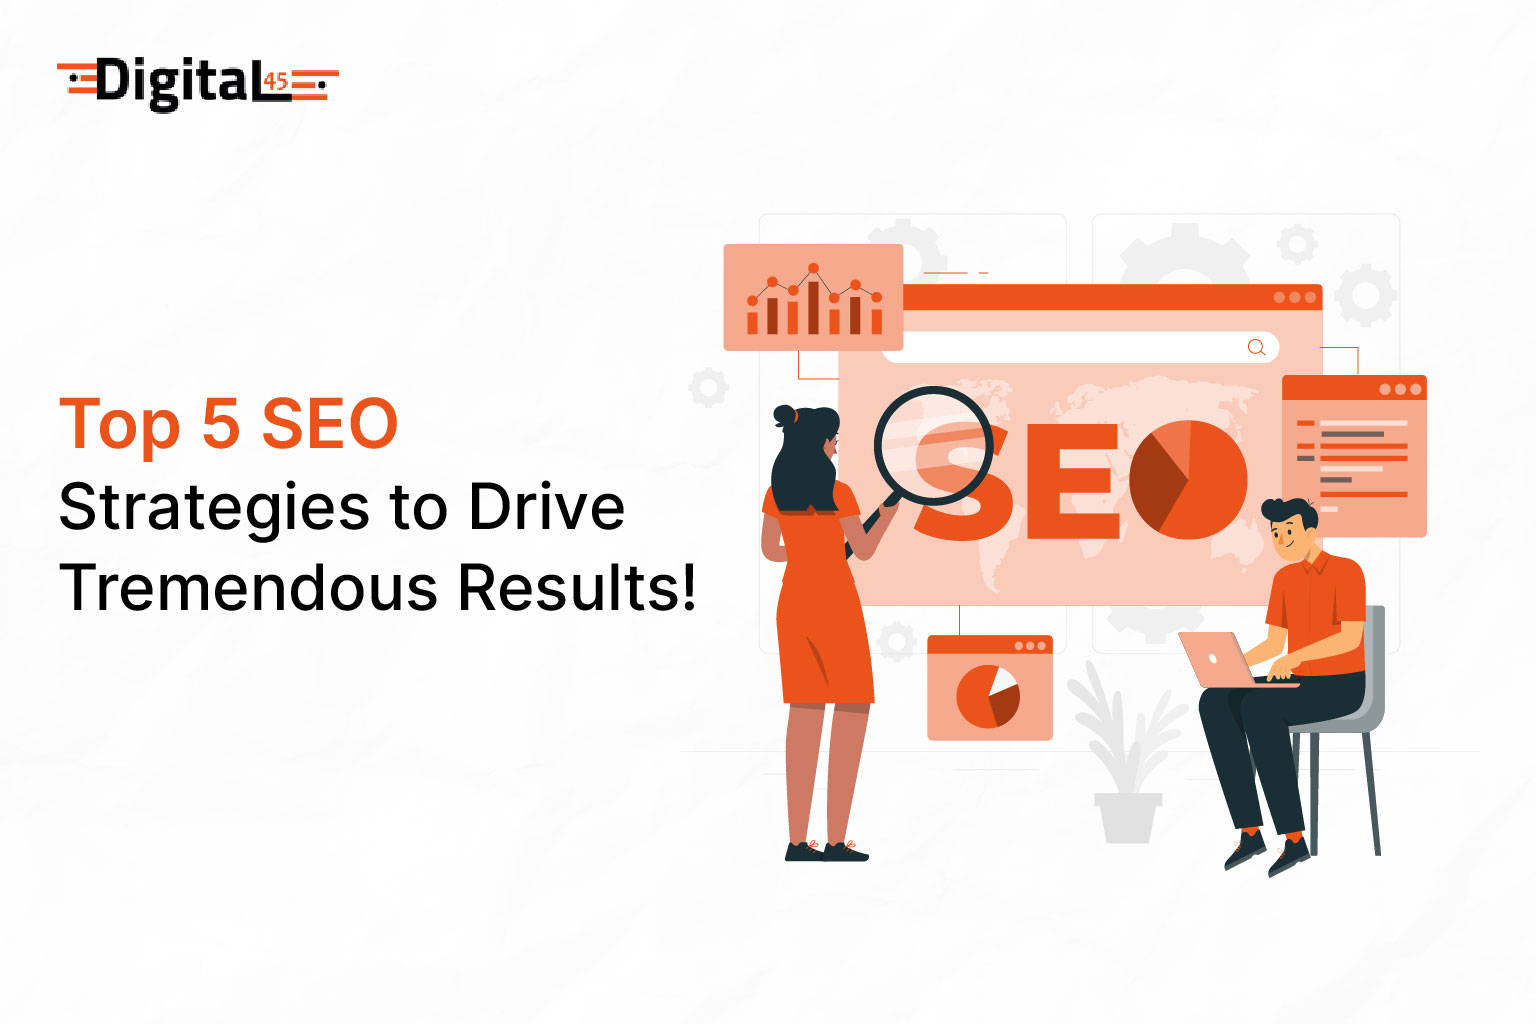 Top 5 SEO Strategies to Drive Tremendous Results